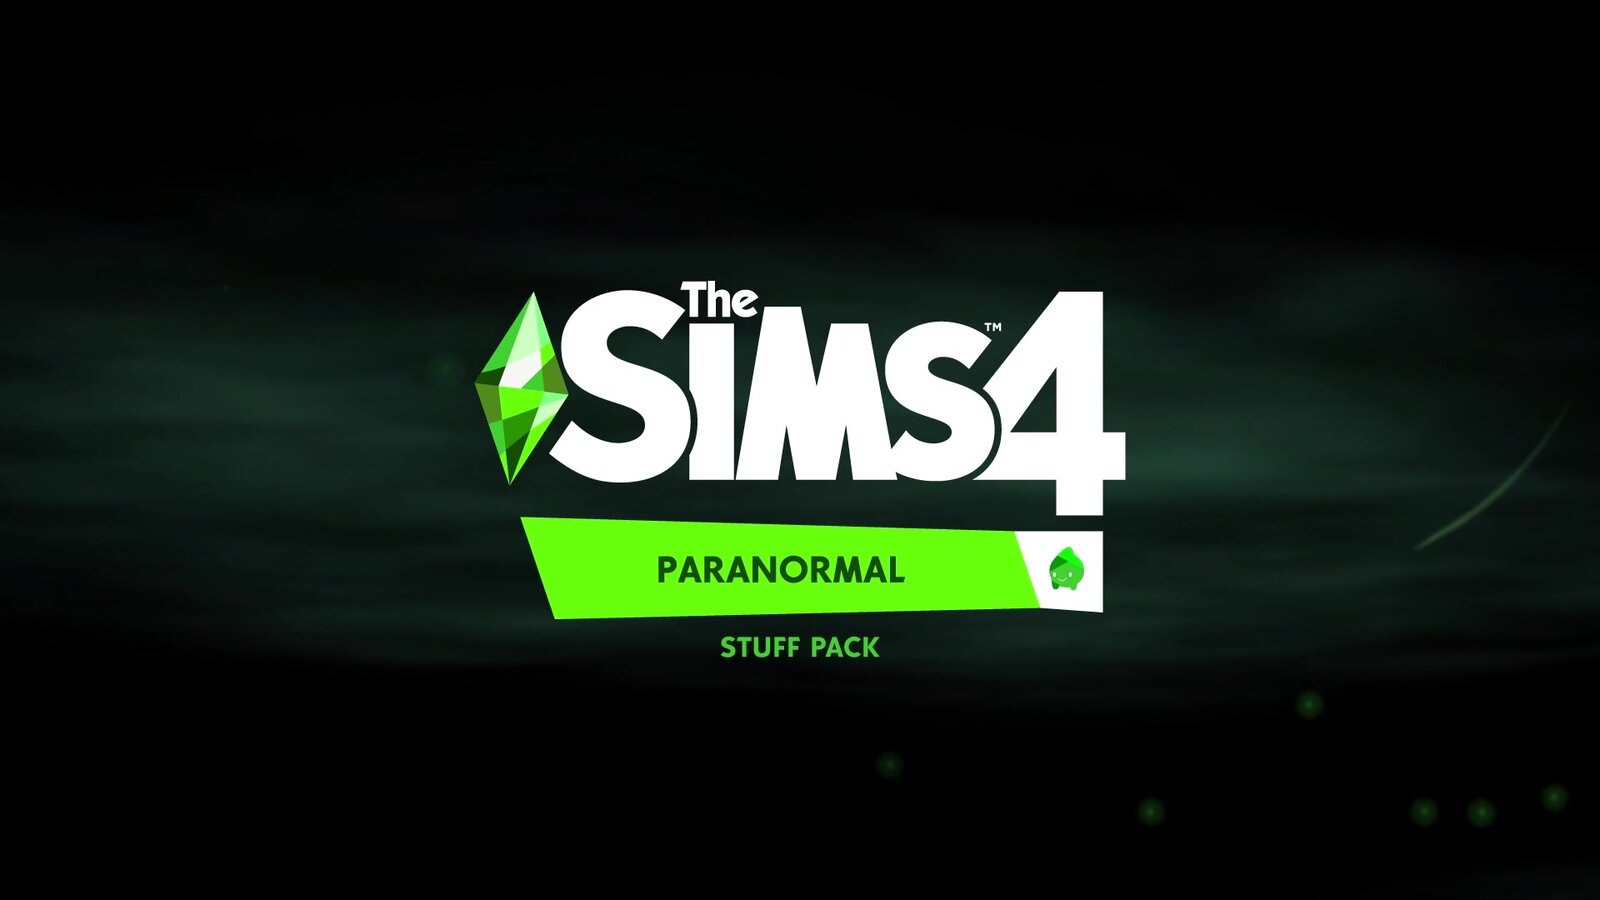 The Sims 4 - Paranormal Stuff Pack